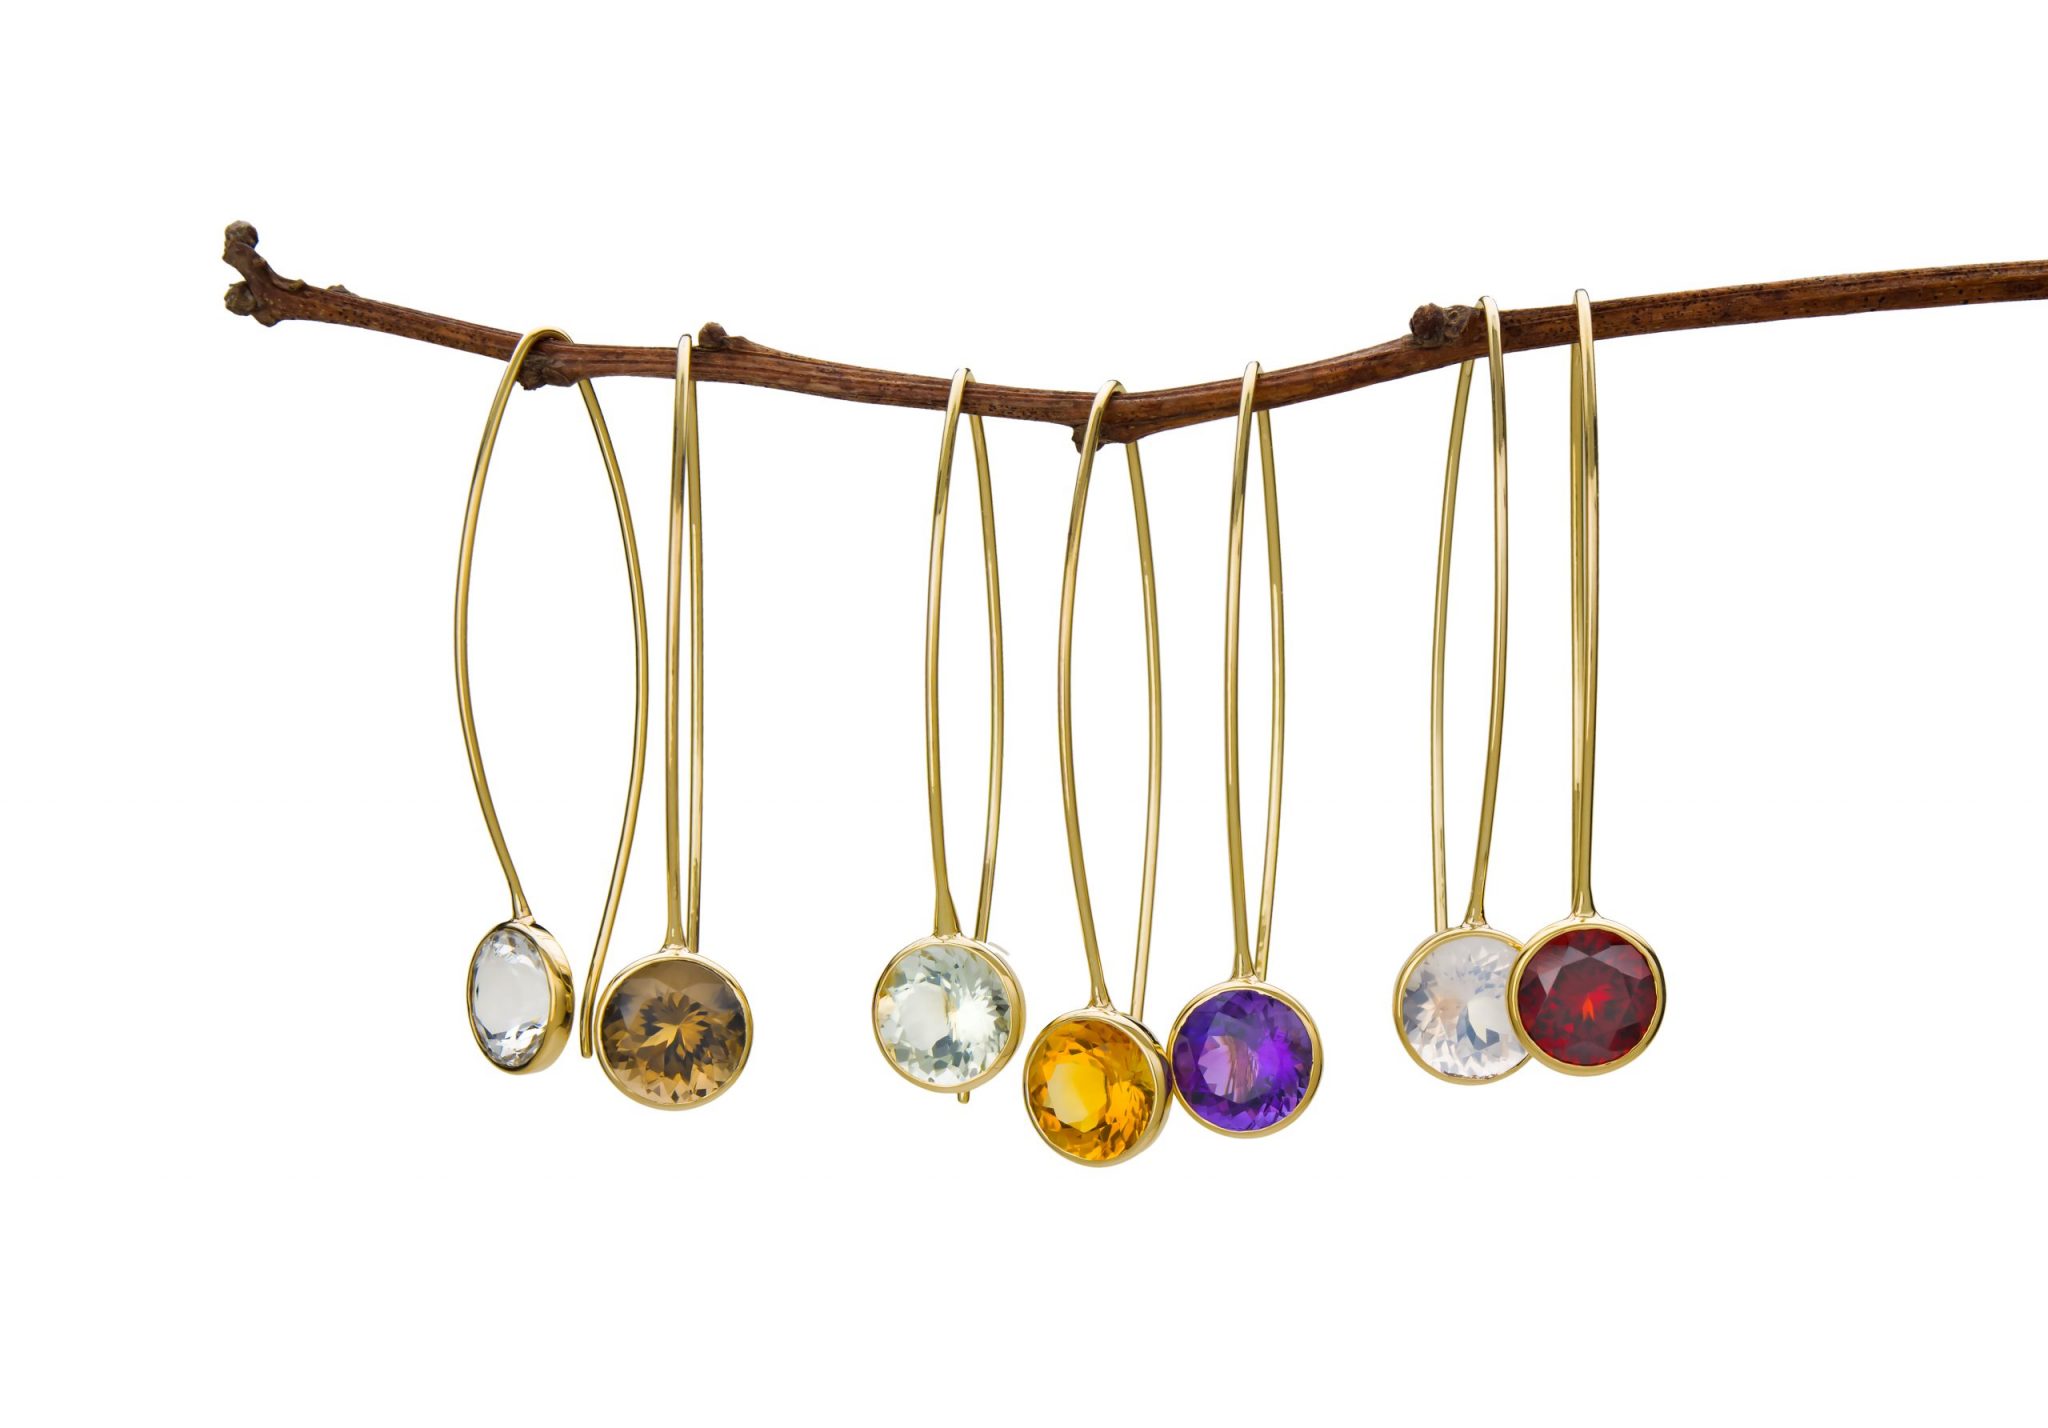 Toby Pomeroy necklaces with white, gold, purple, and red stones